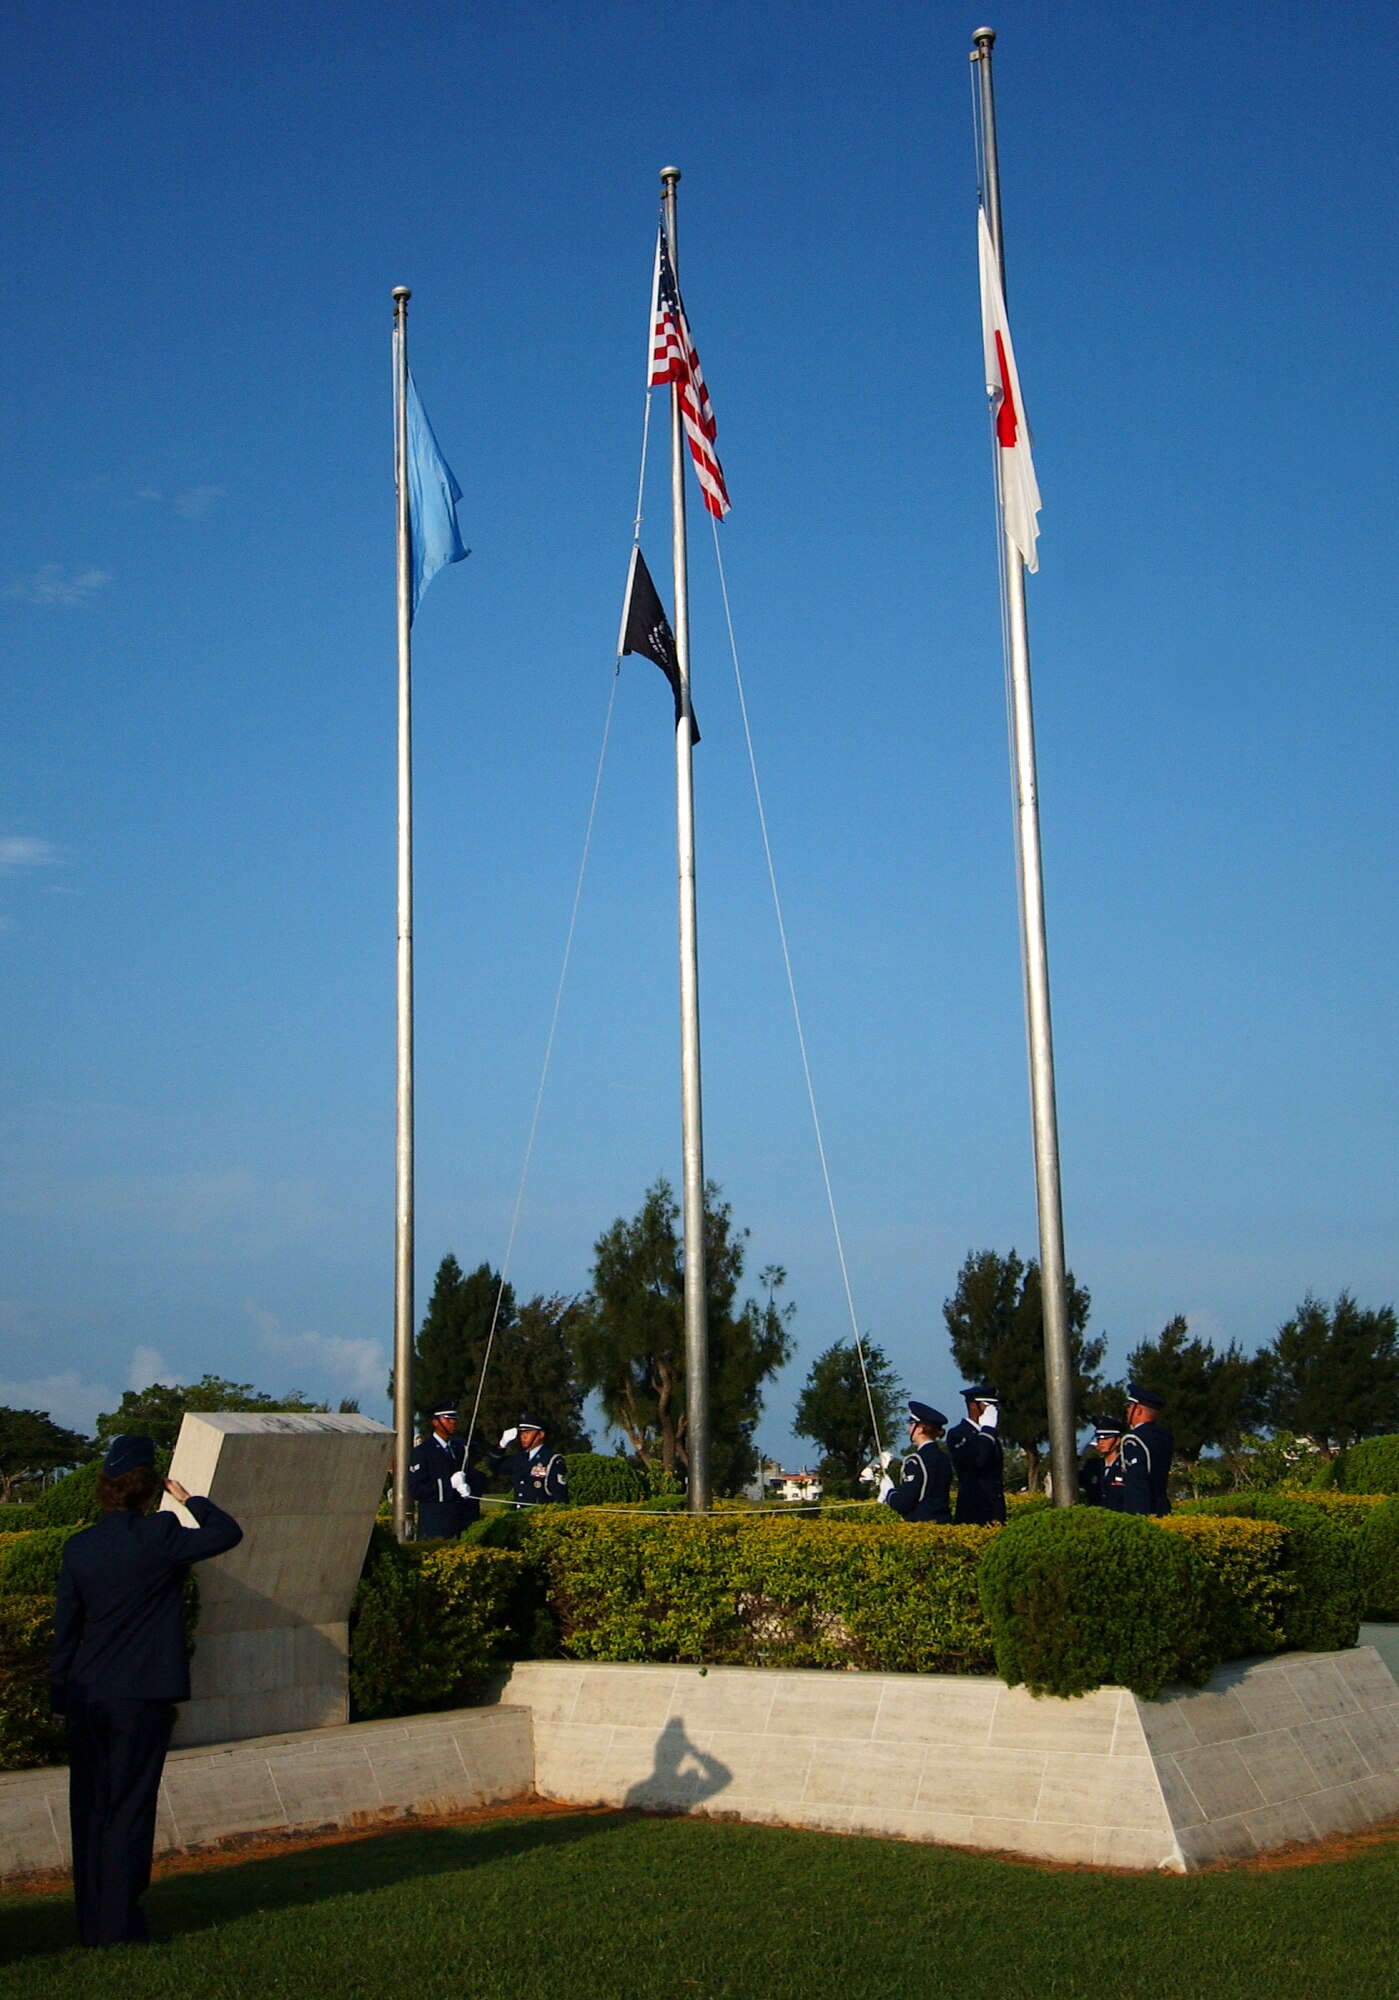 The Kadena Air Base Honor Guards raises the flags for the National Anthem during a Memorial Day ceremony at Kadena Air Base, Japan, May 26. Veterans and military members from all four branches of the military attended the event to remember those who died in our nation's service.
(U.S. Air Force photo/Tech. Sgt. Rey Ramon)